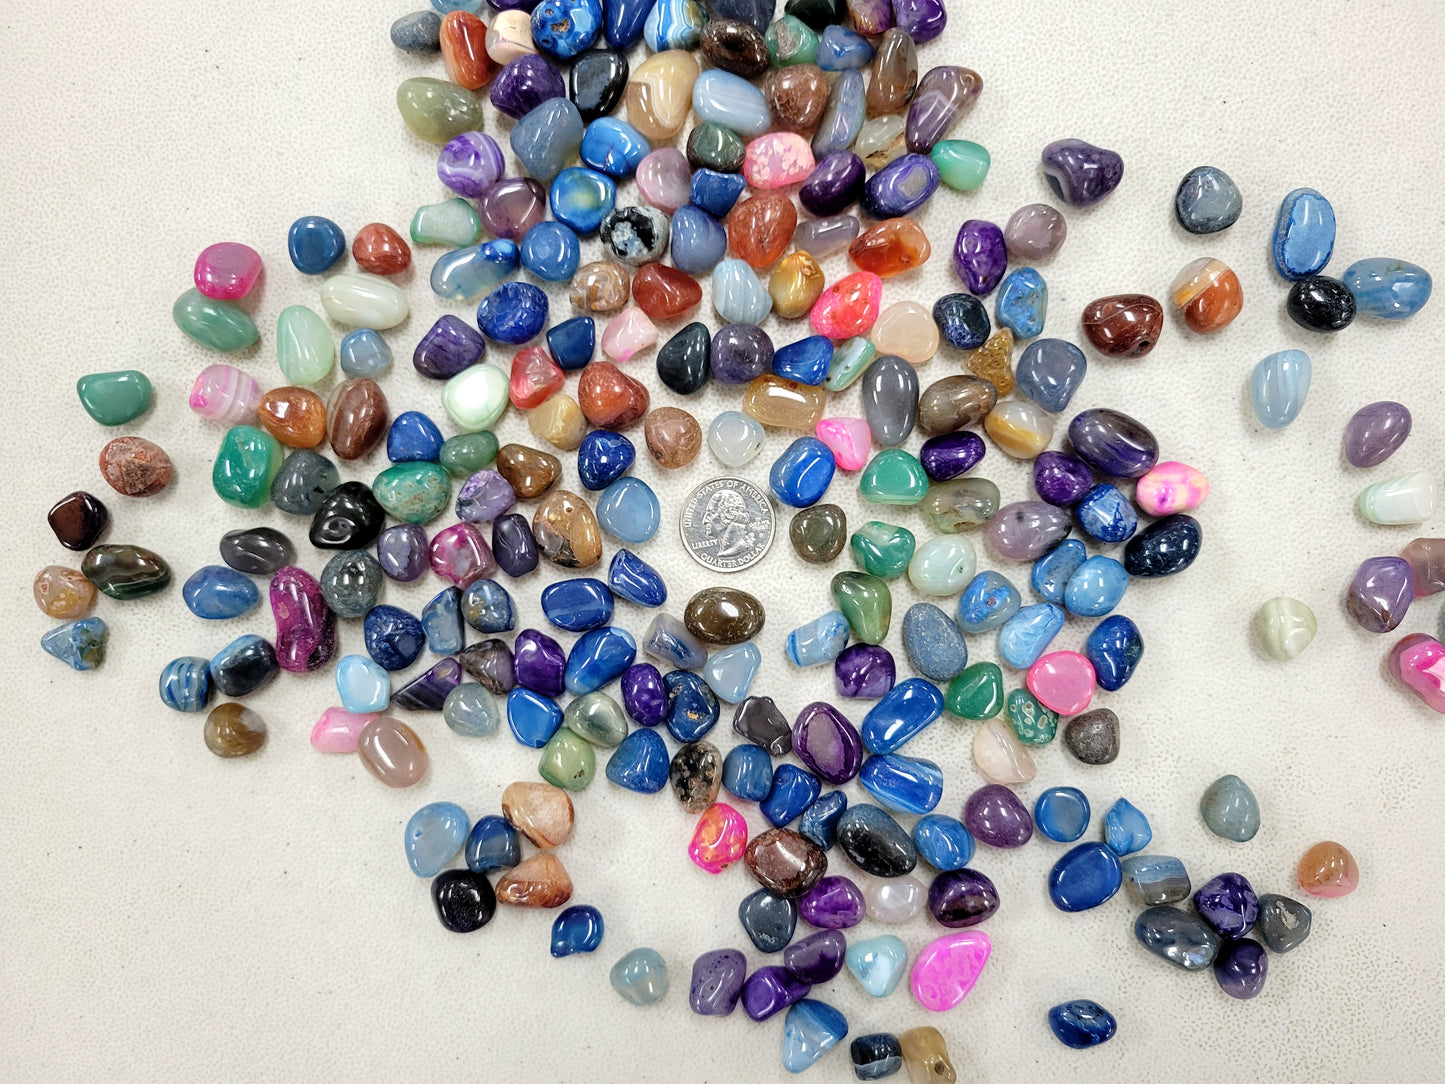 Small Tumbled Agate Crystals - Dyed or Natural